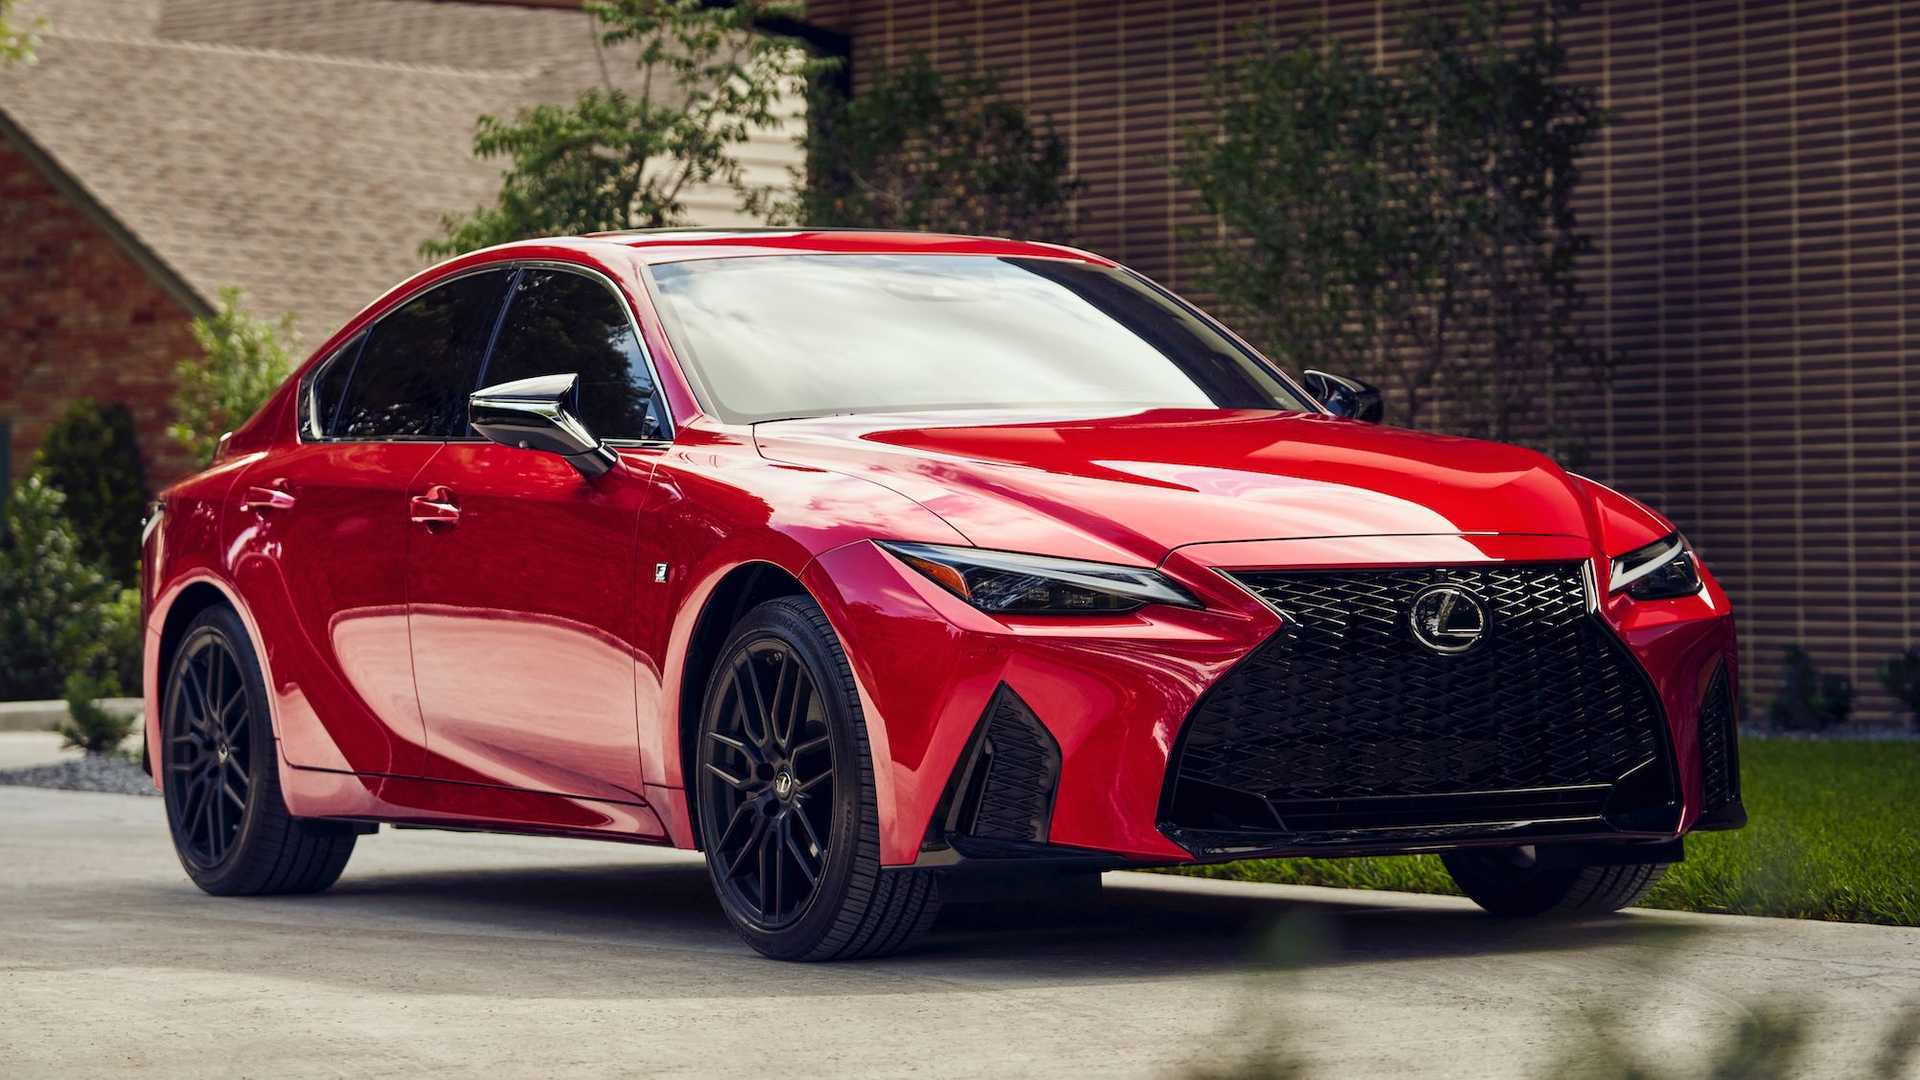 2021 Lexus IS Starts At $39,900, IS 350 F Sport Asks $42,900